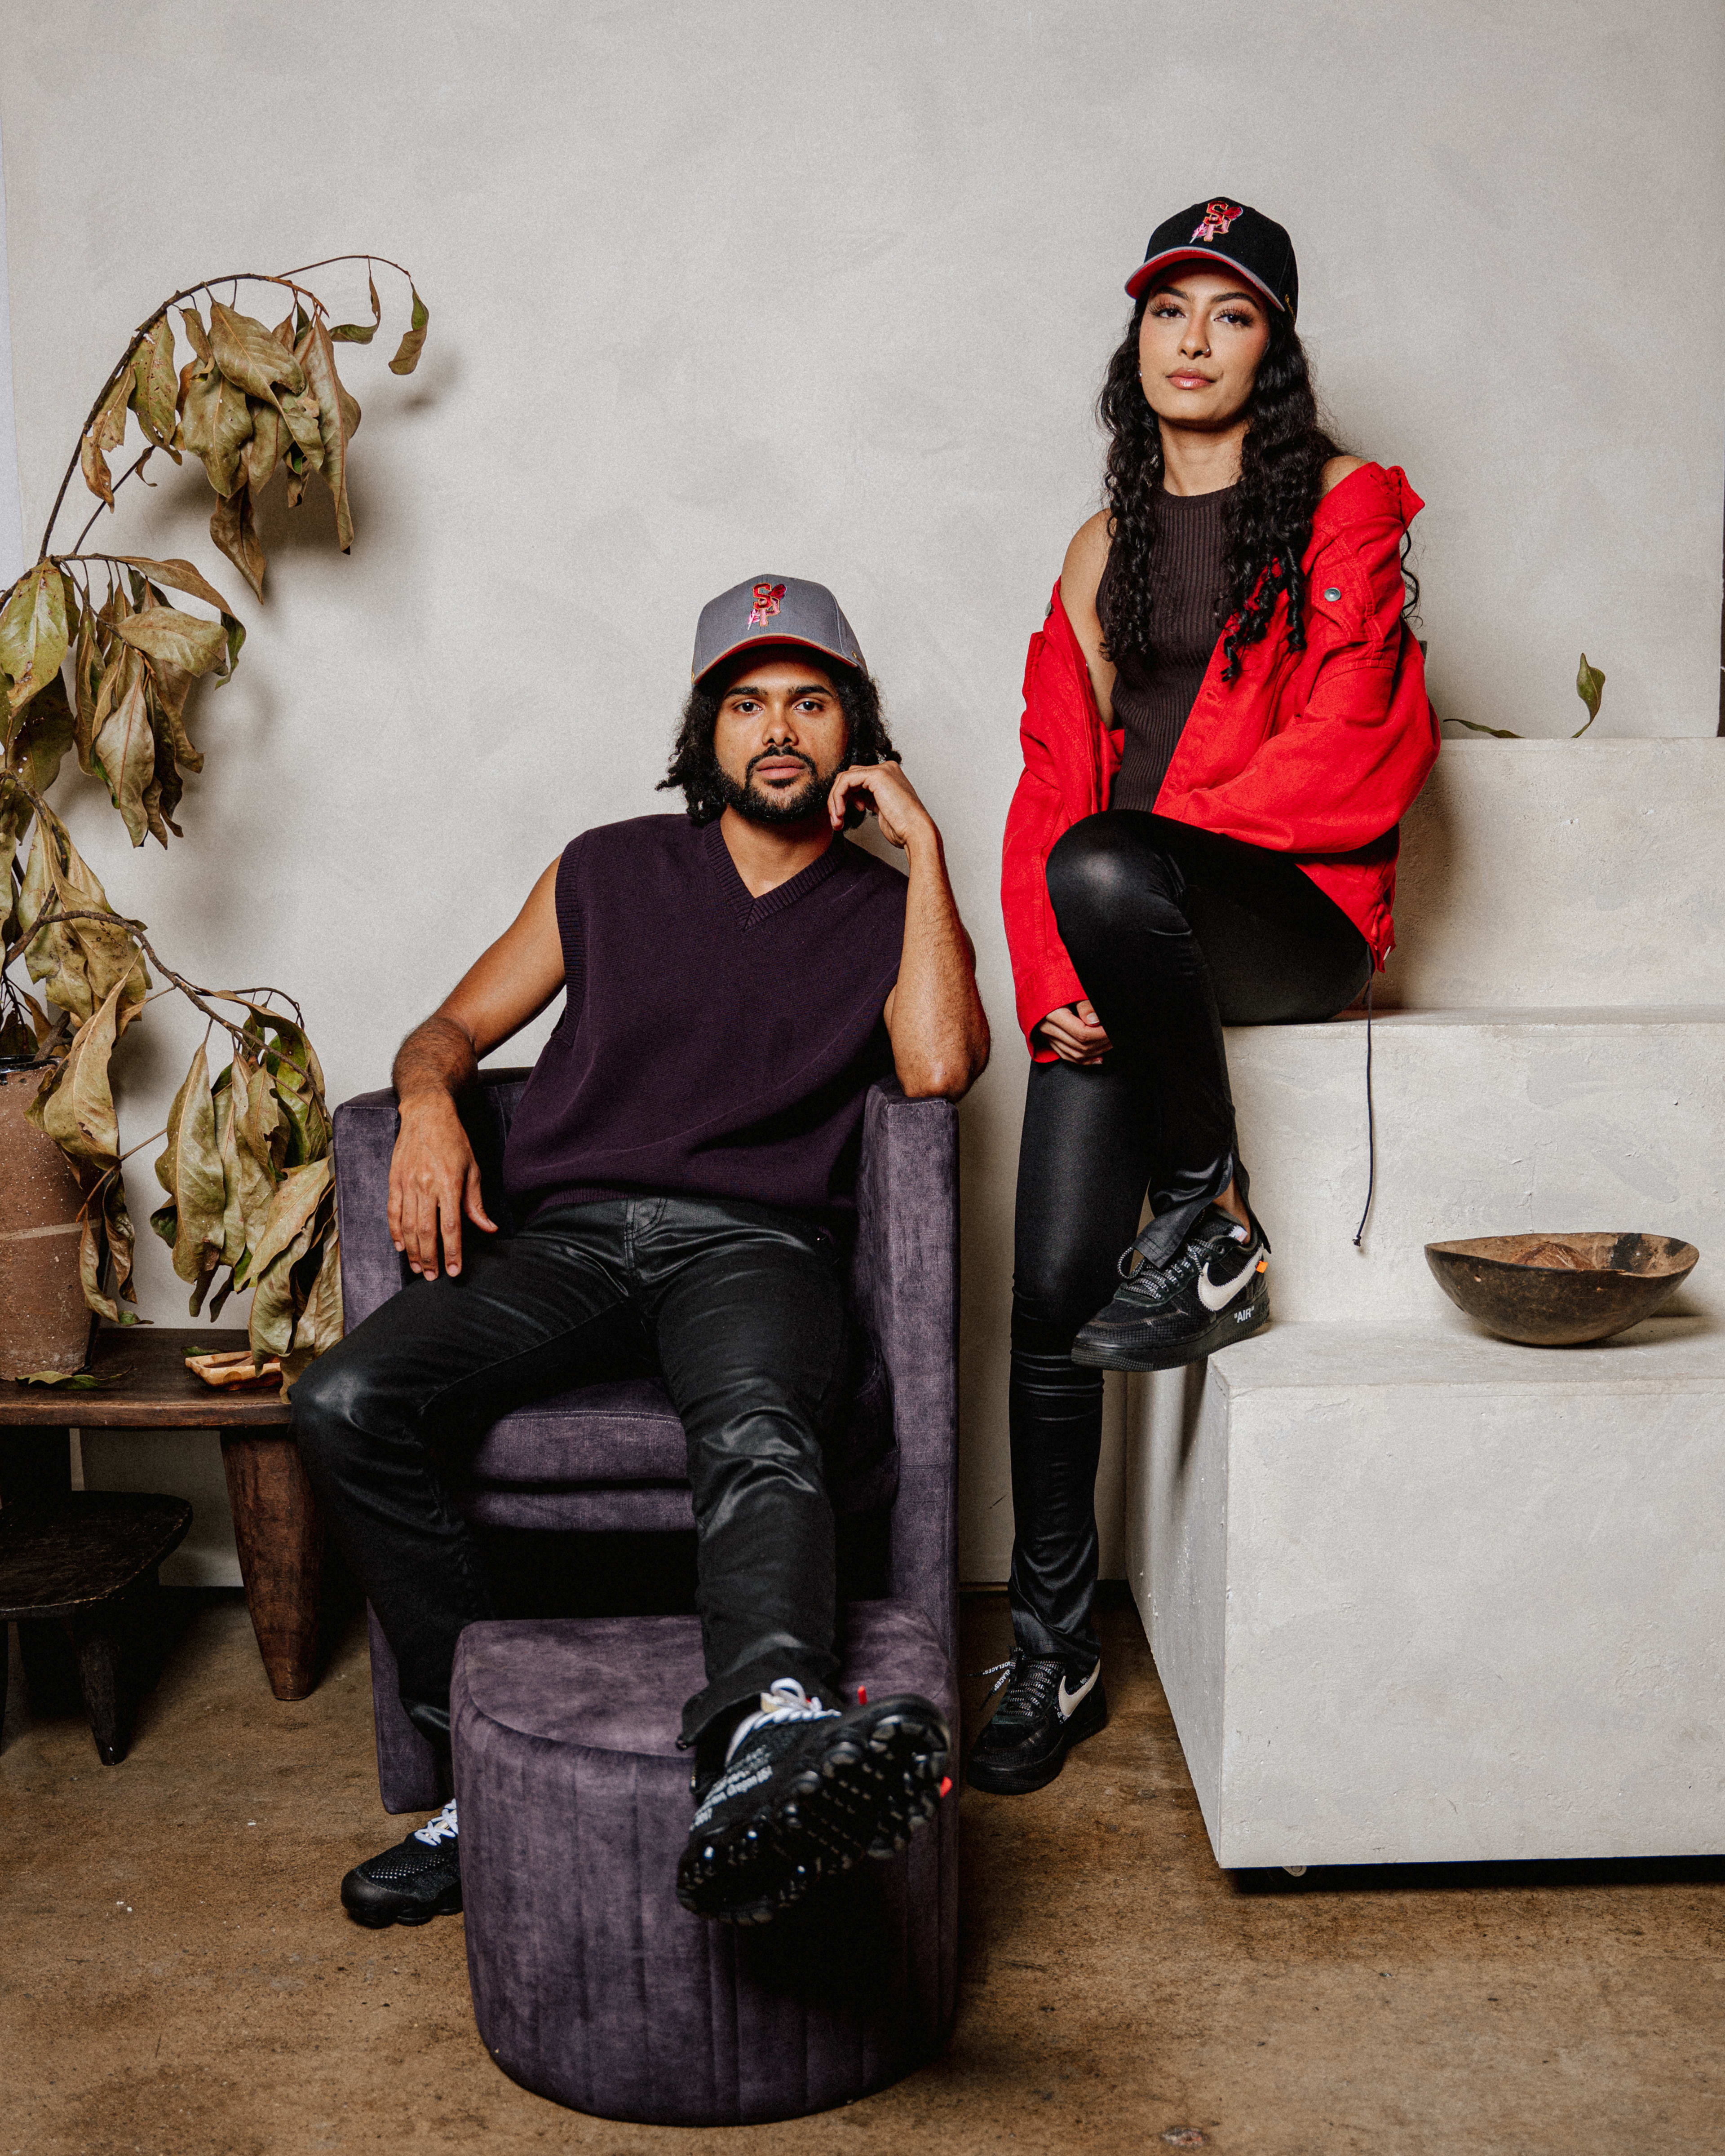 A rustic photo shoot with a man and a woman posing in baseball hats and black leather trousers.